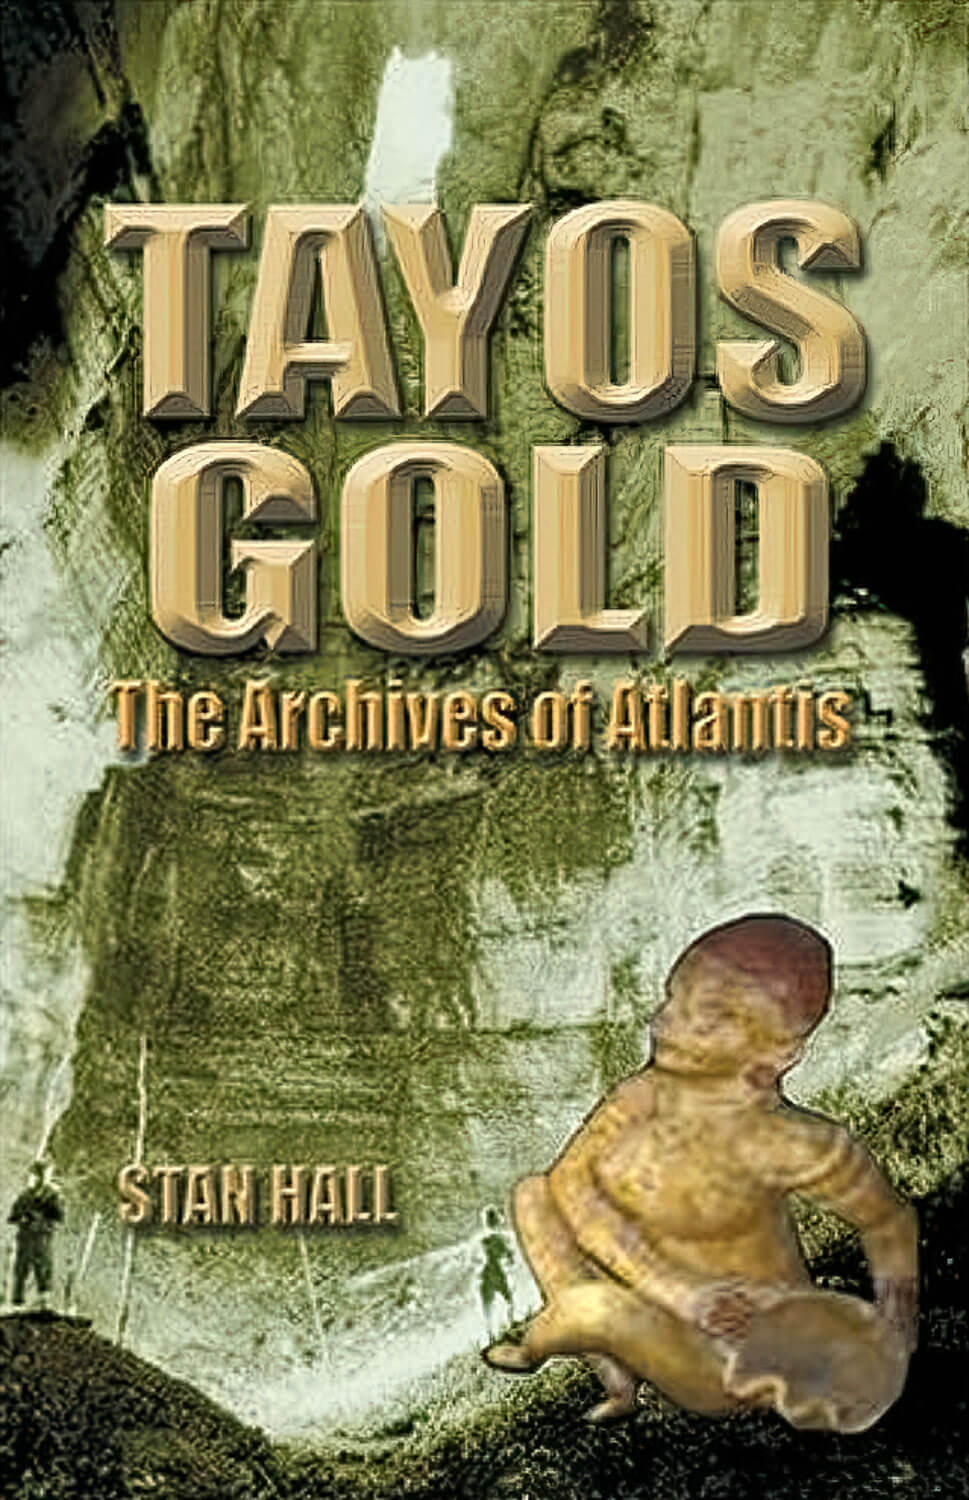 Tayos Gold: The Archives of Atlantis by Stan Hall book